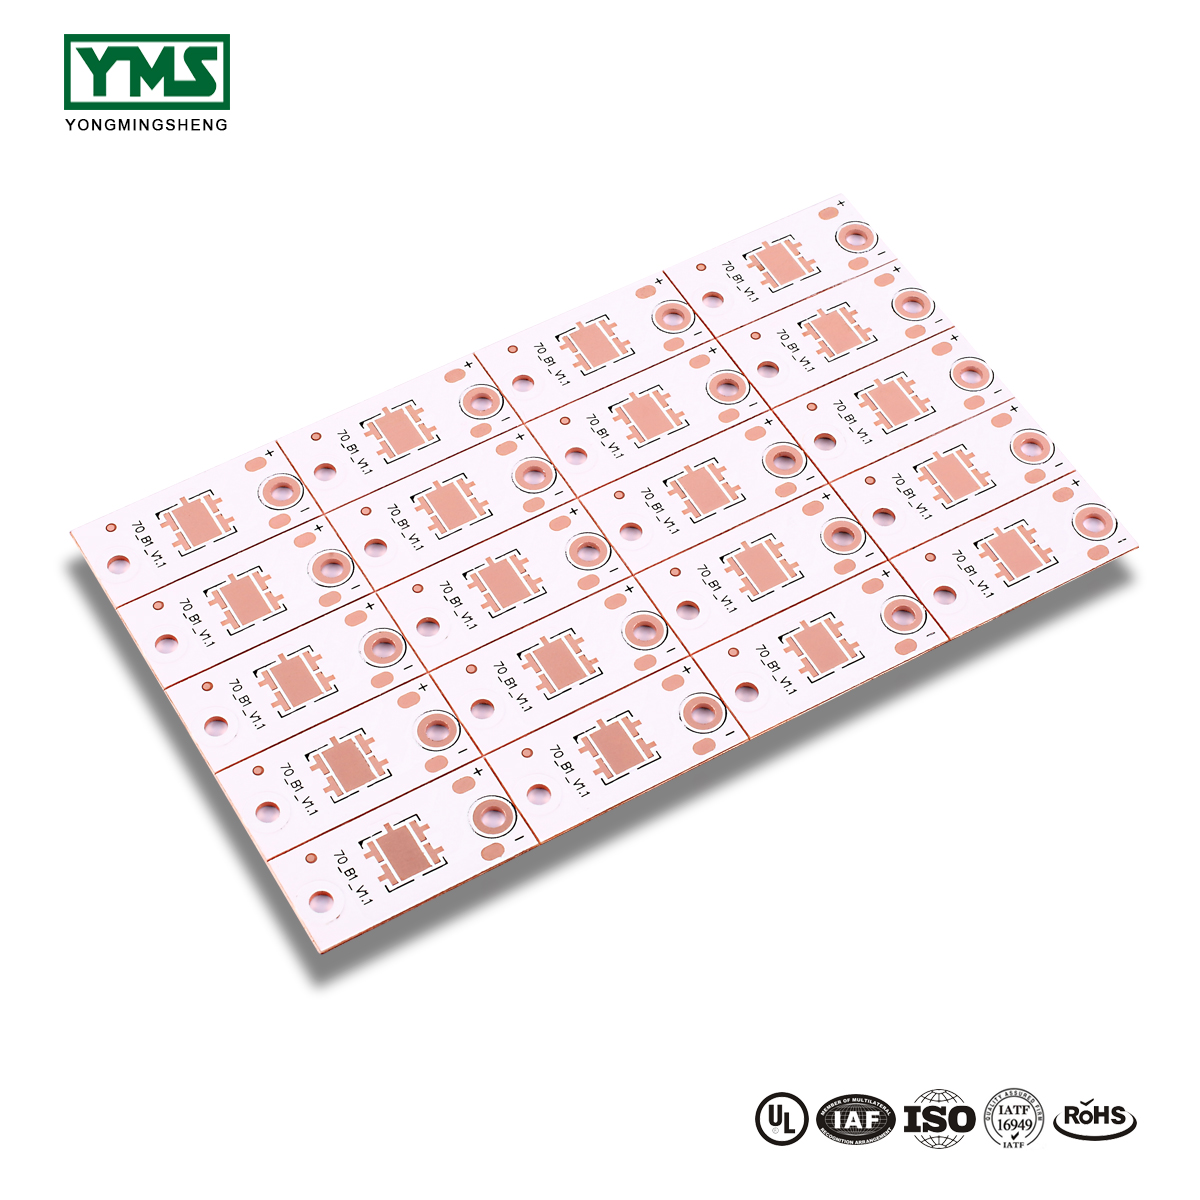 Low price for Ultra-Thin Pcb - 1Layer Thermoelectric Copper base Board | YMSPCB – Yongmingsheng